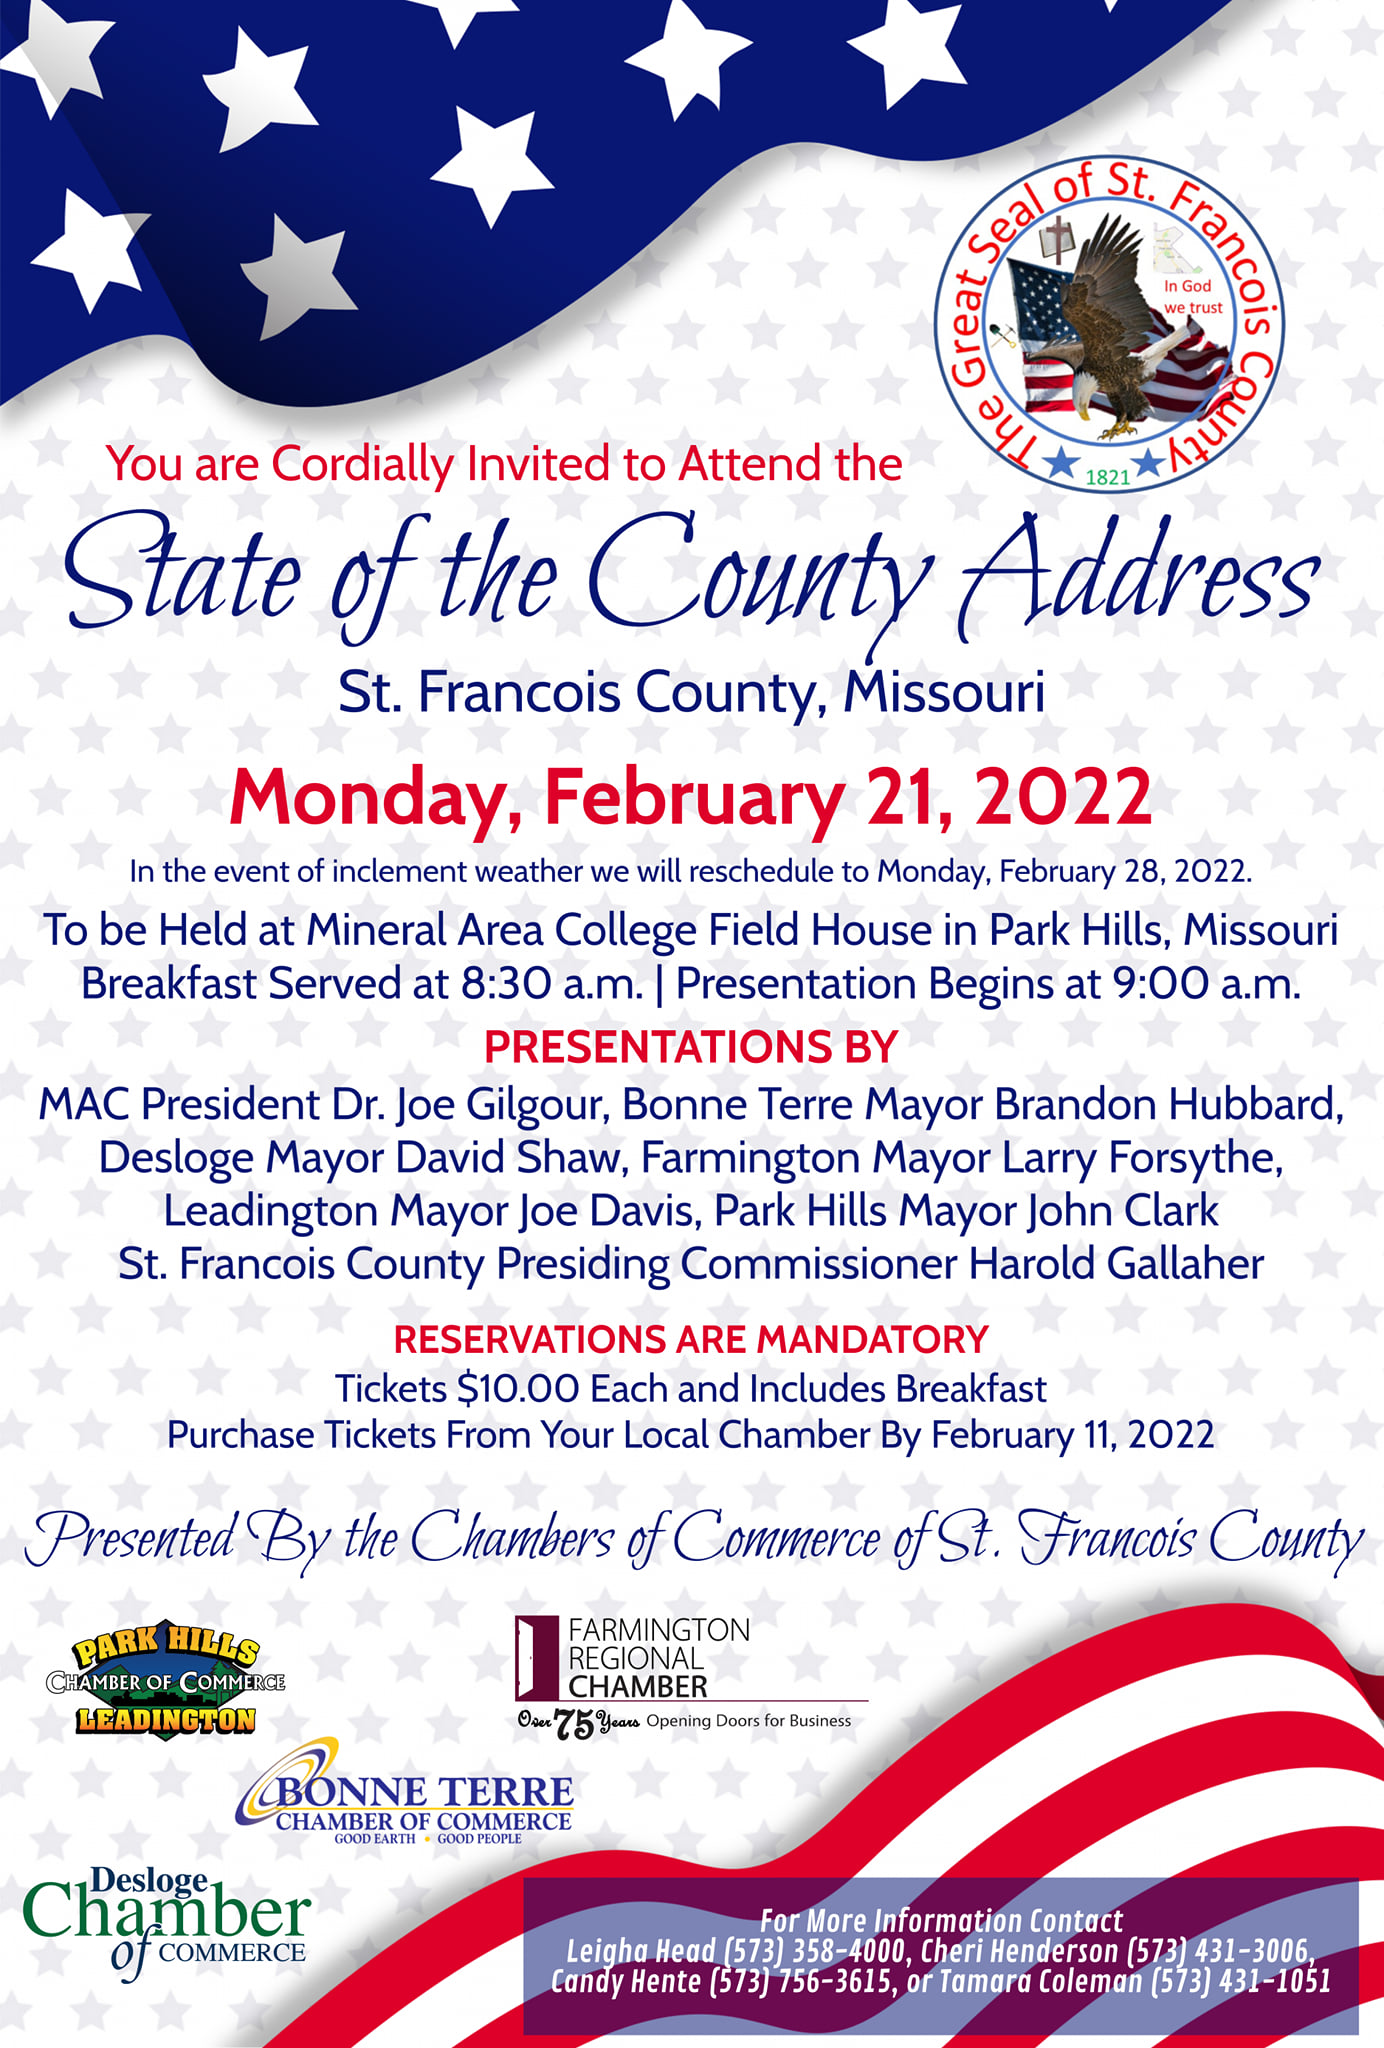 State of the County Address Monday